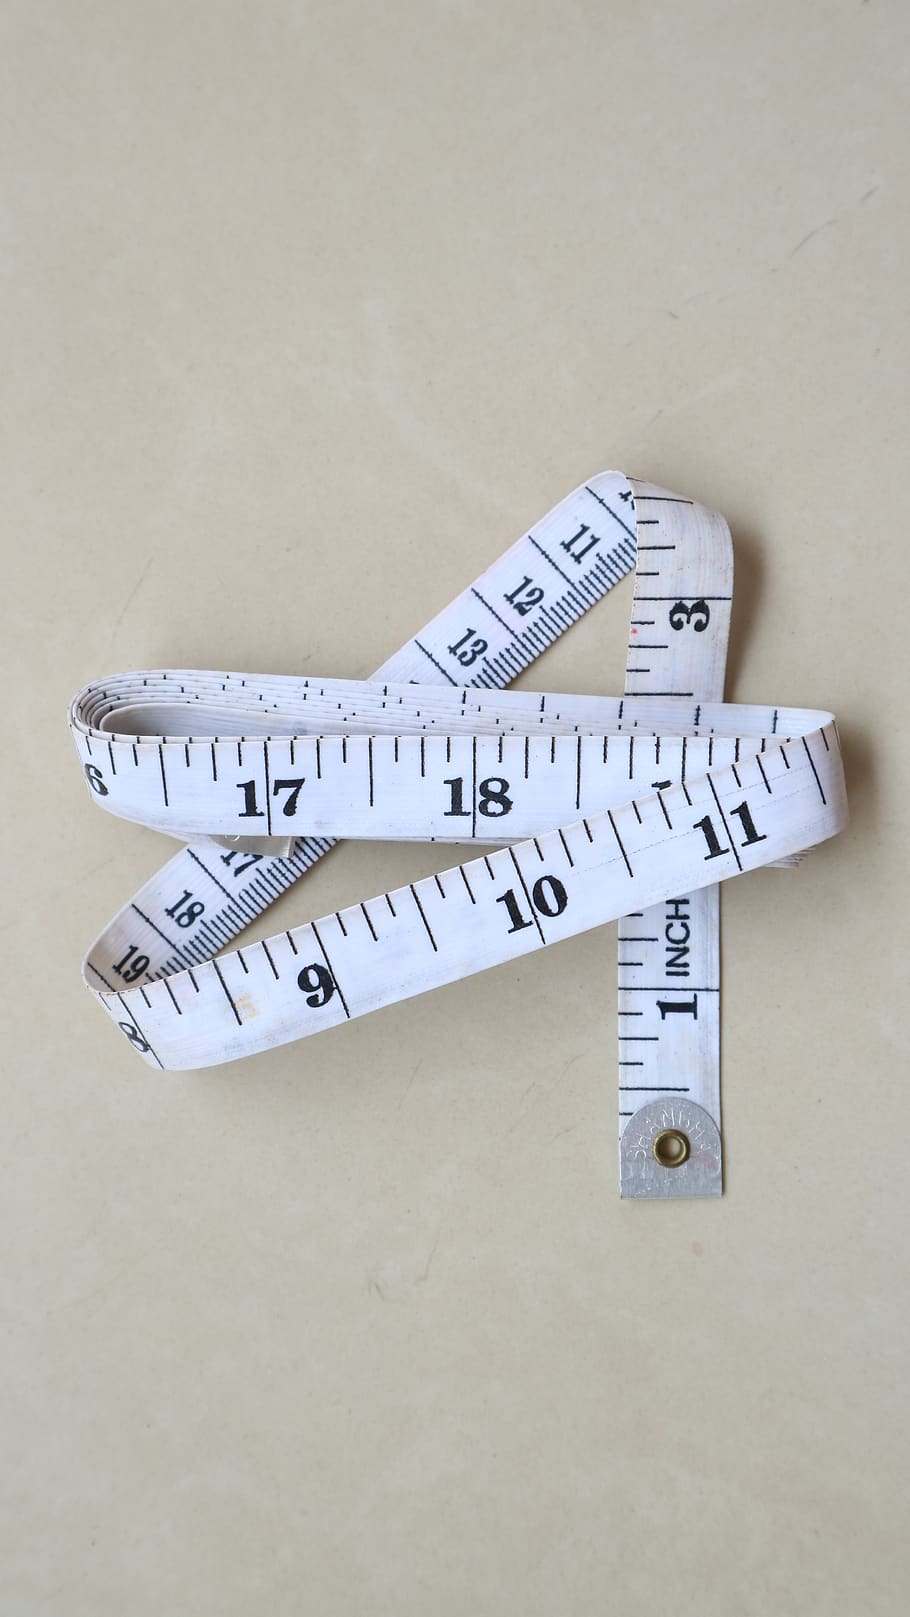 actually measuring tape life size ruler